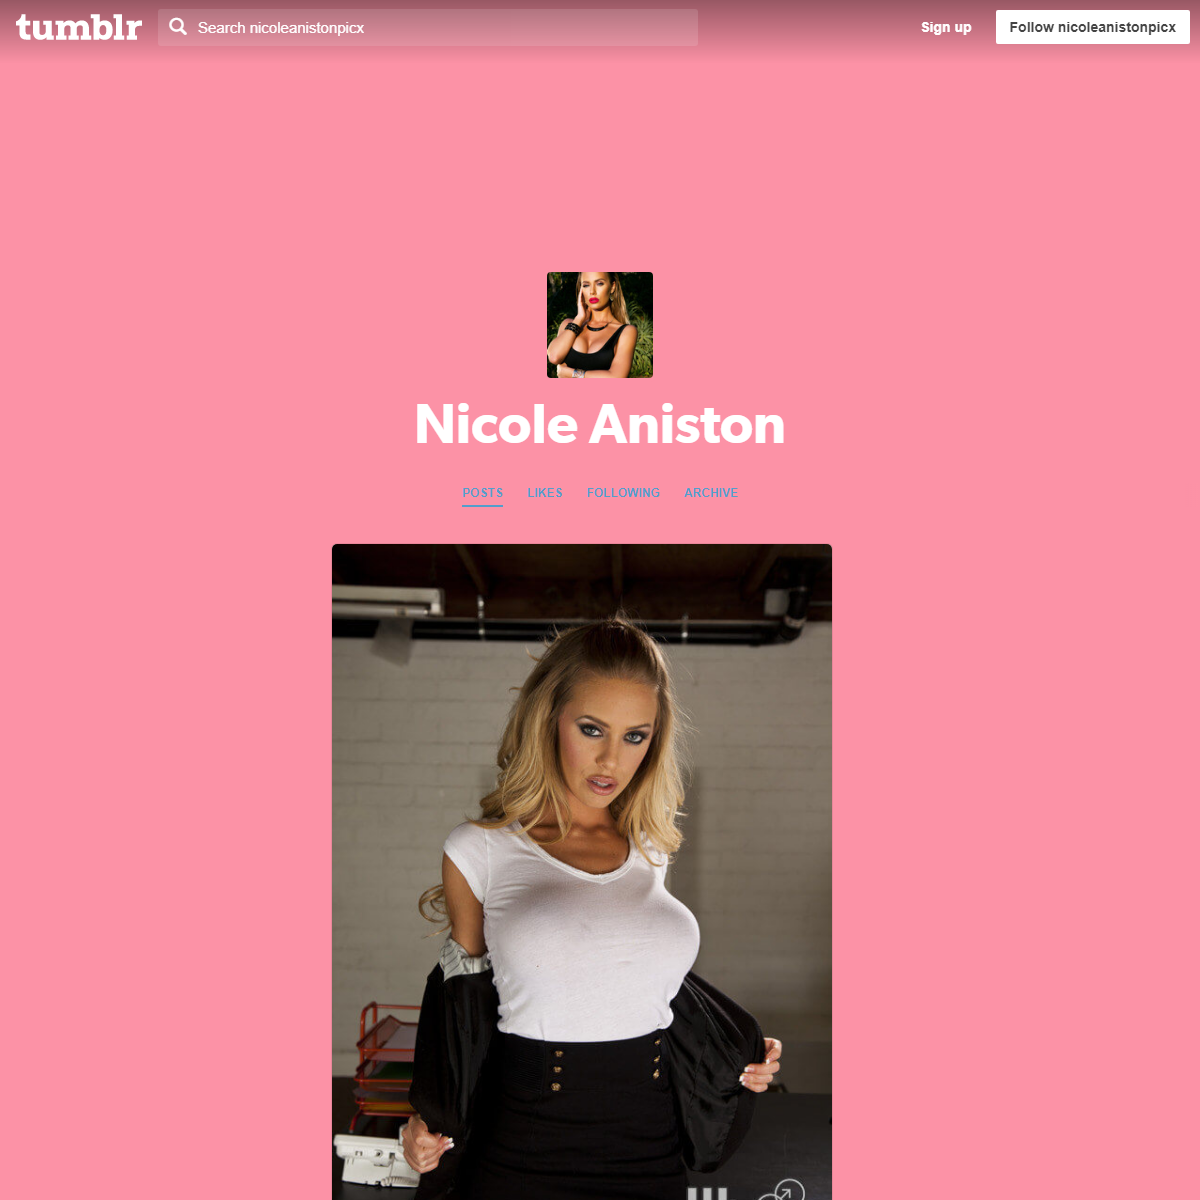 A complete backup of https://nicoleanistonpicx.tumblr.com